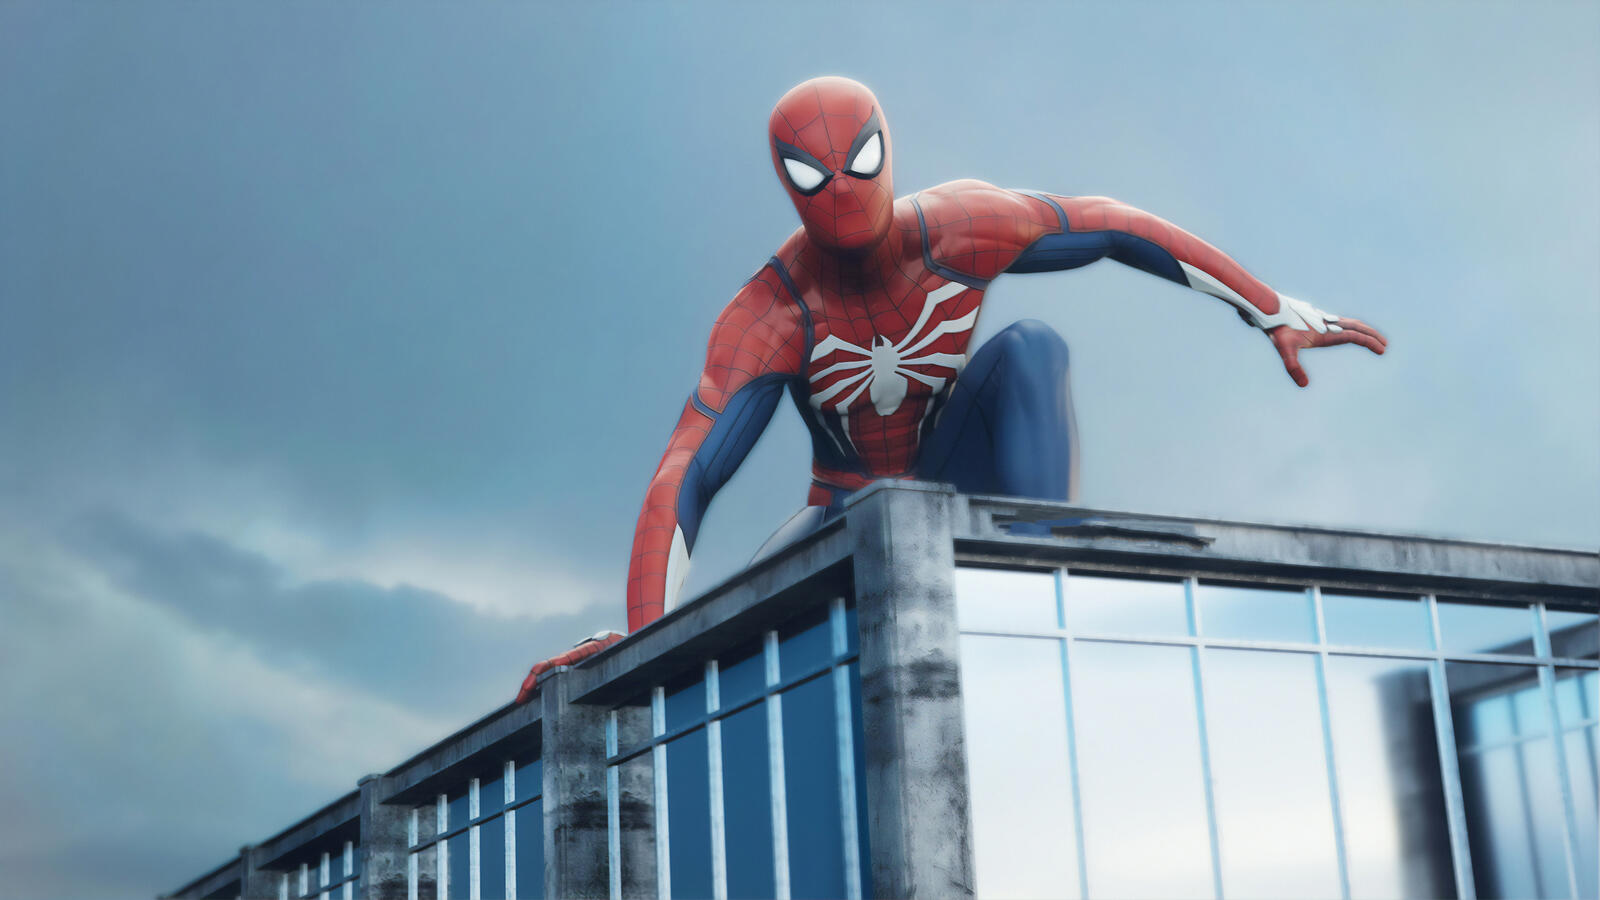 Wallpapers spider man the spider-man movie superheroes on the desktop